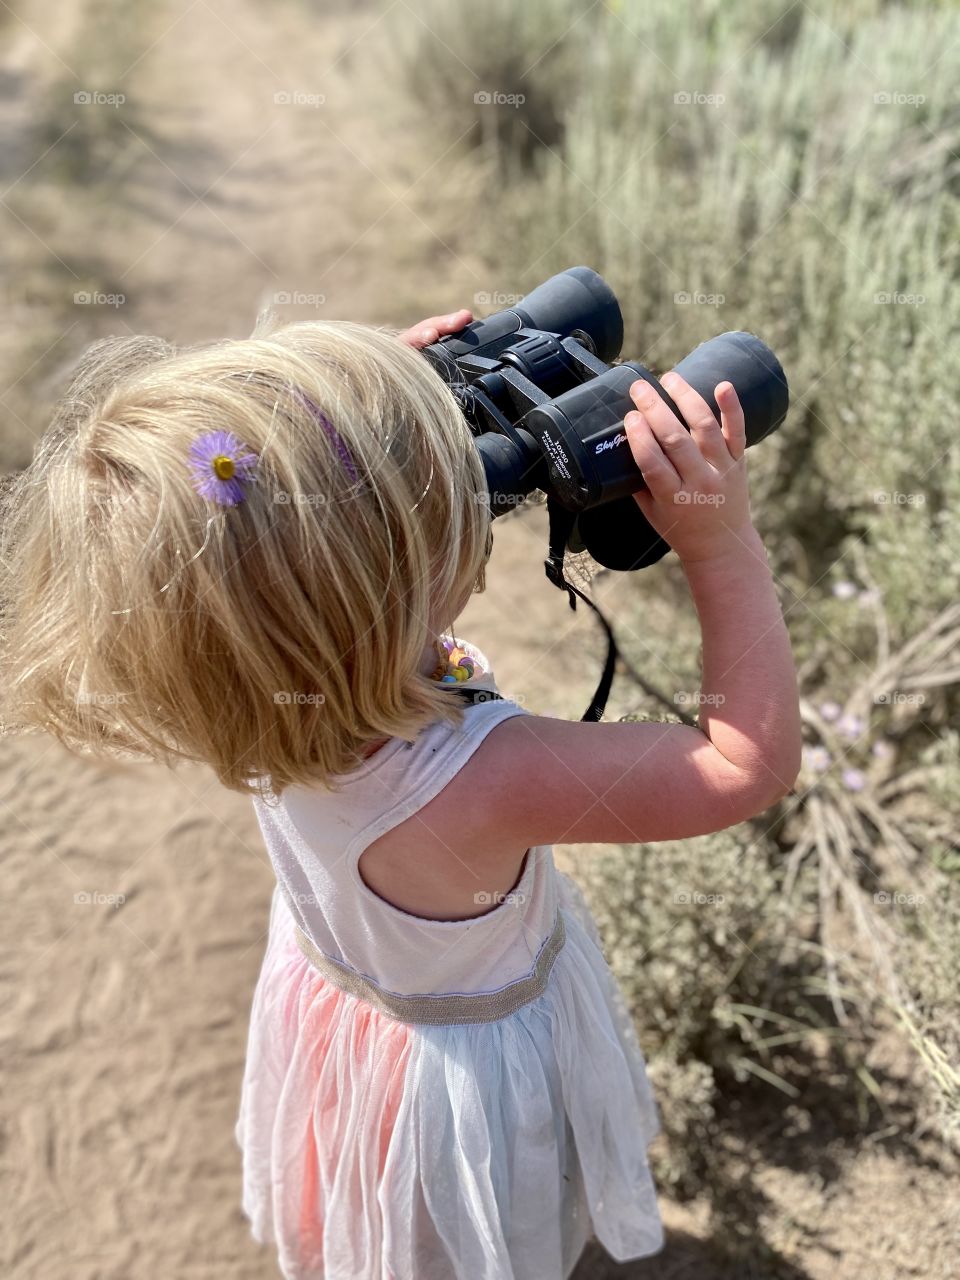 Get Outside! Small Girl Exploring with Binoculars